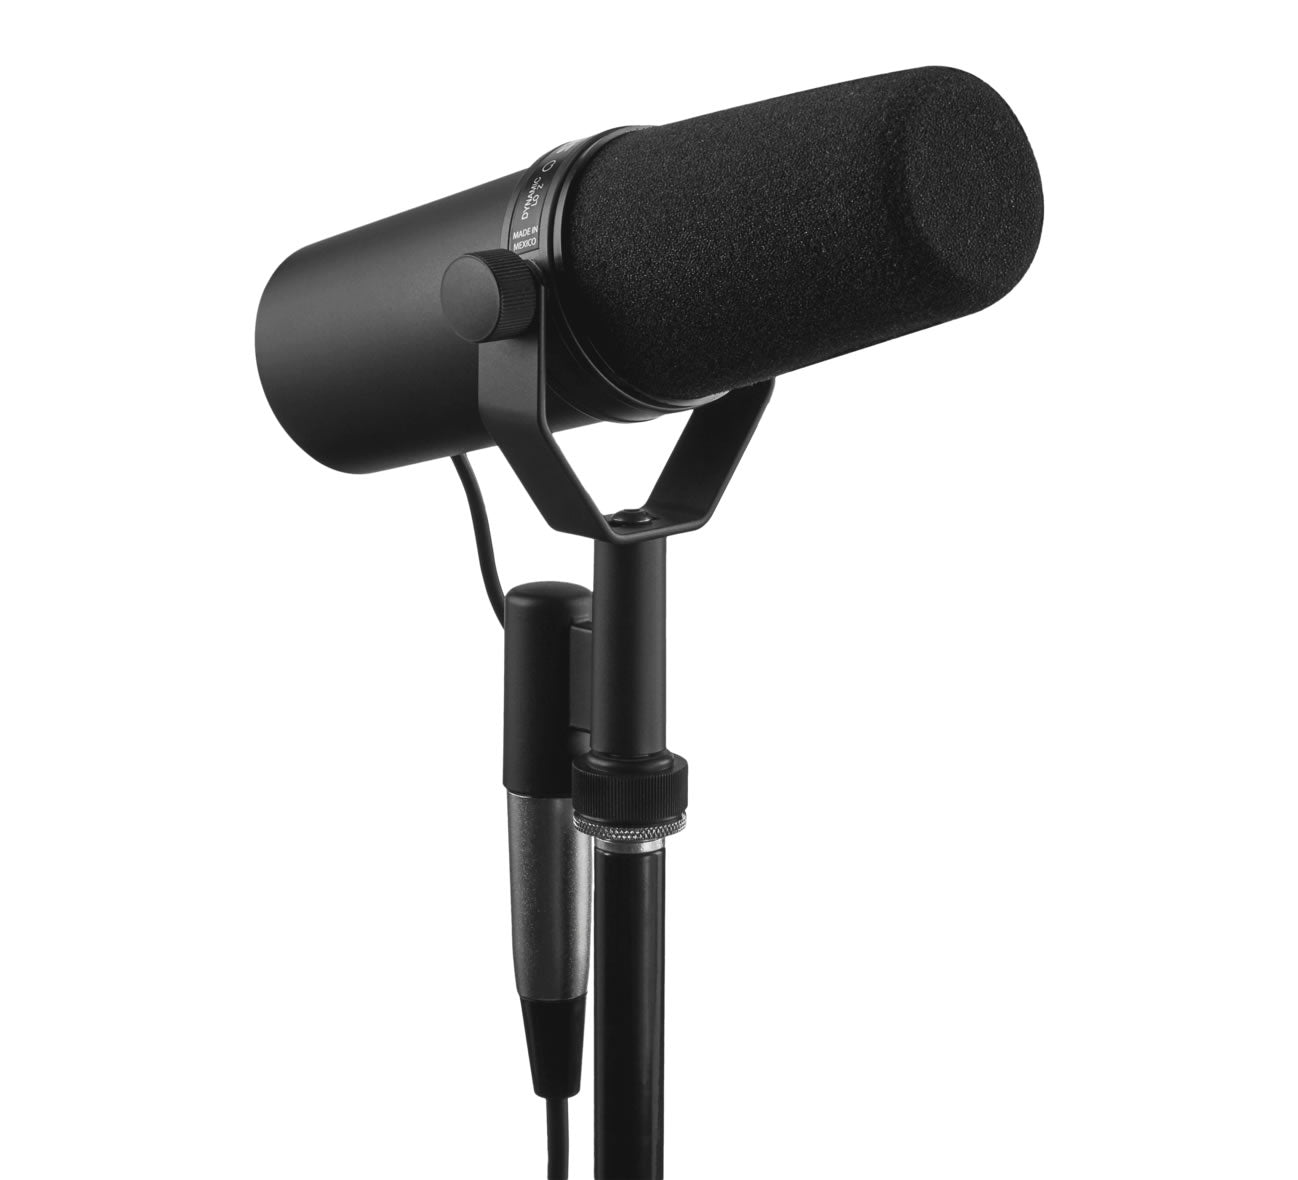 Shure SM7B Dynamic Microphone and CL-1 Cloudlifter Kit with Stand